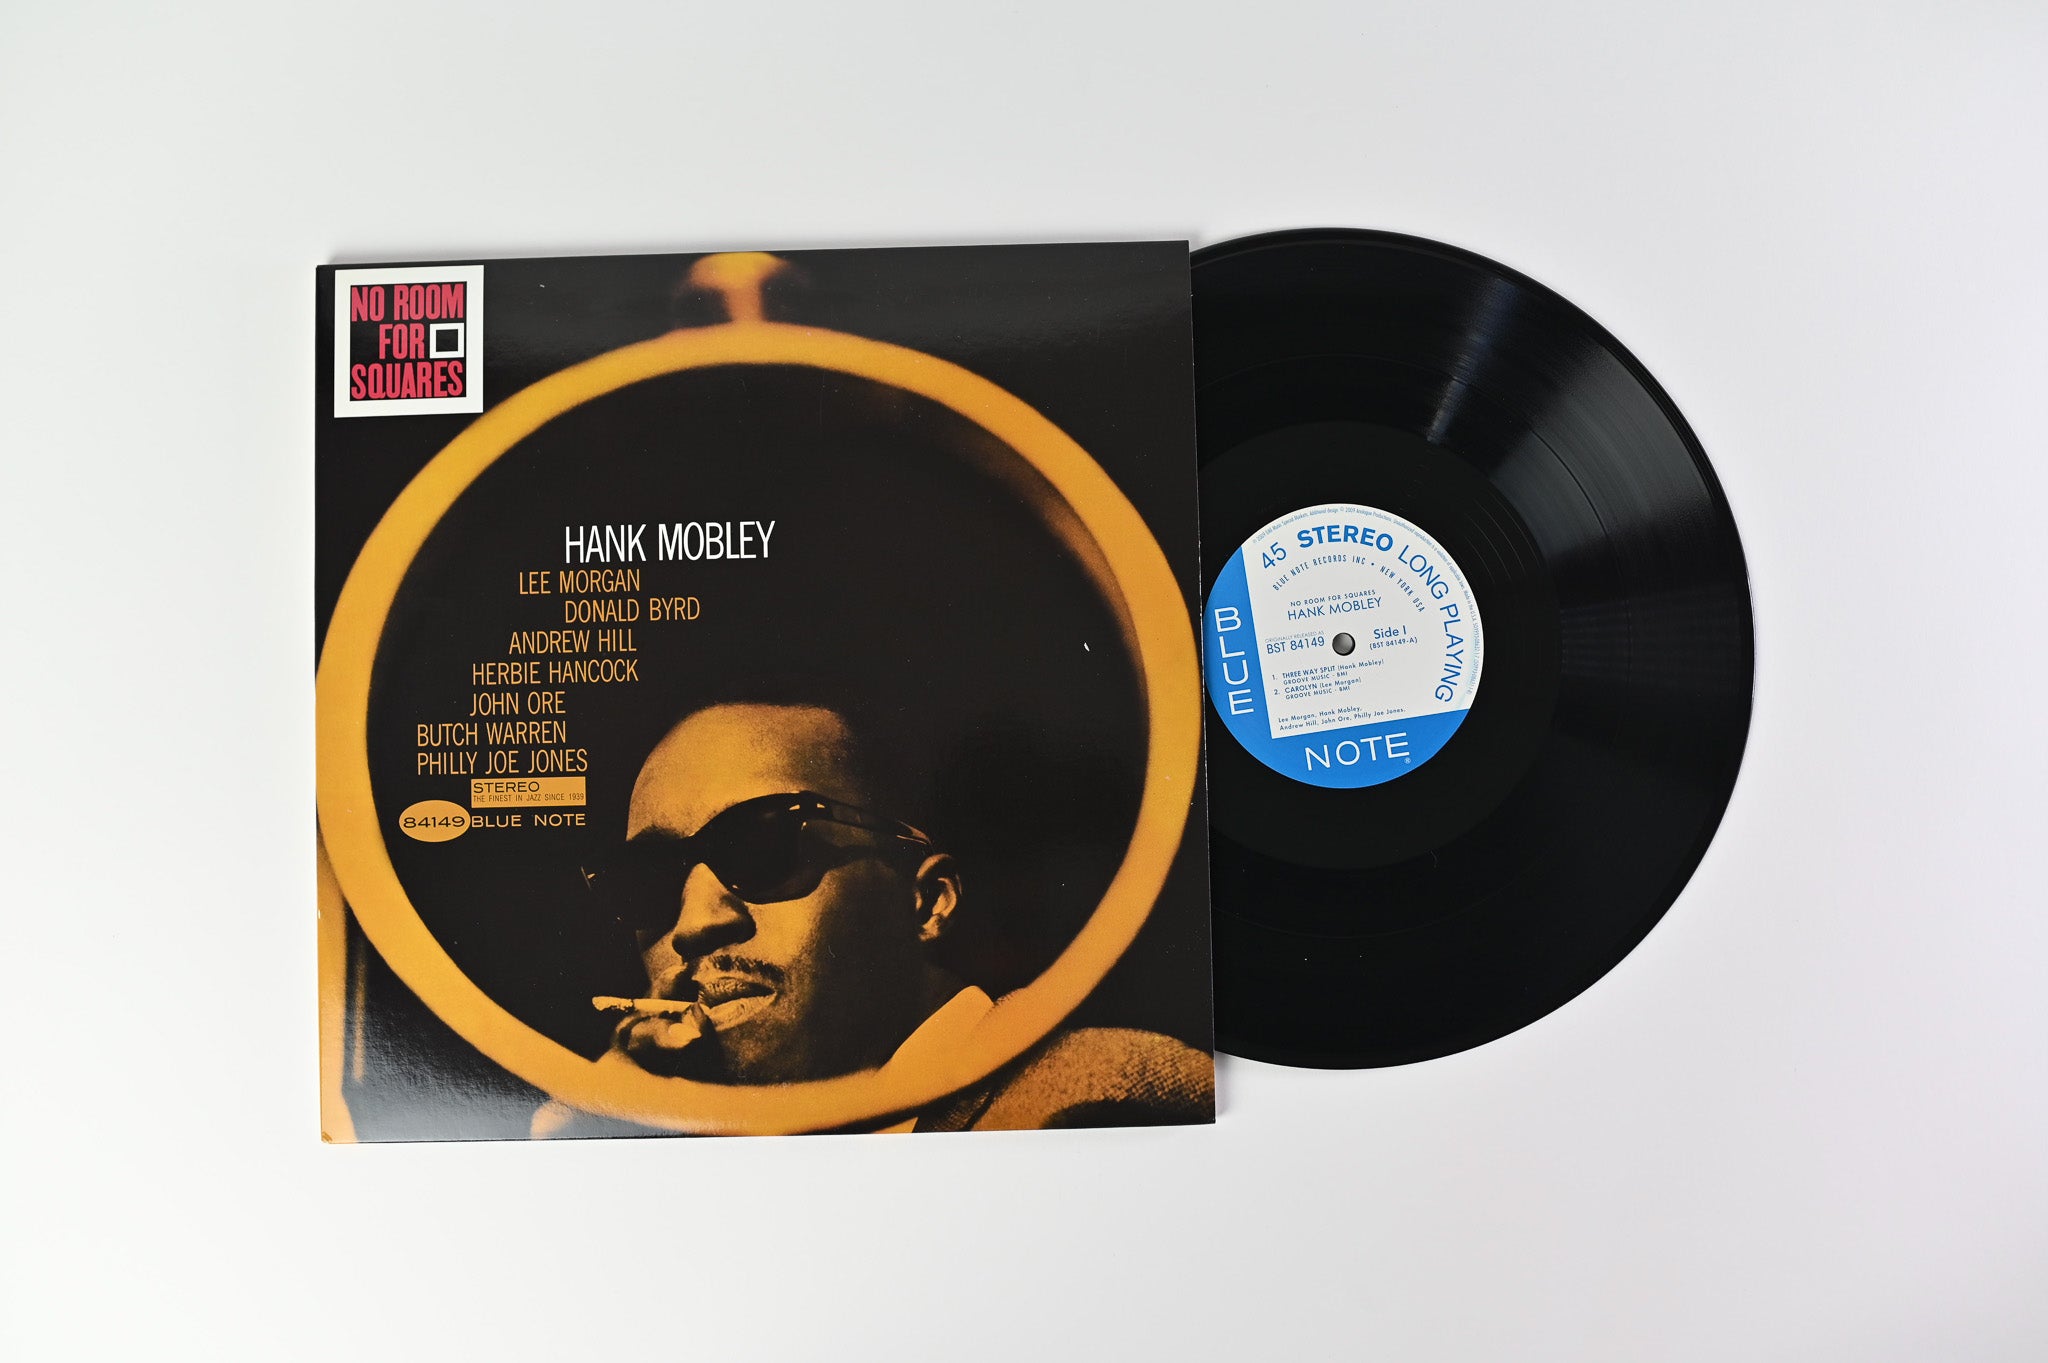 Hank Mobley - No Room For Squares on Blue Note Analogue Productions Reissue Numbered 45 RPM